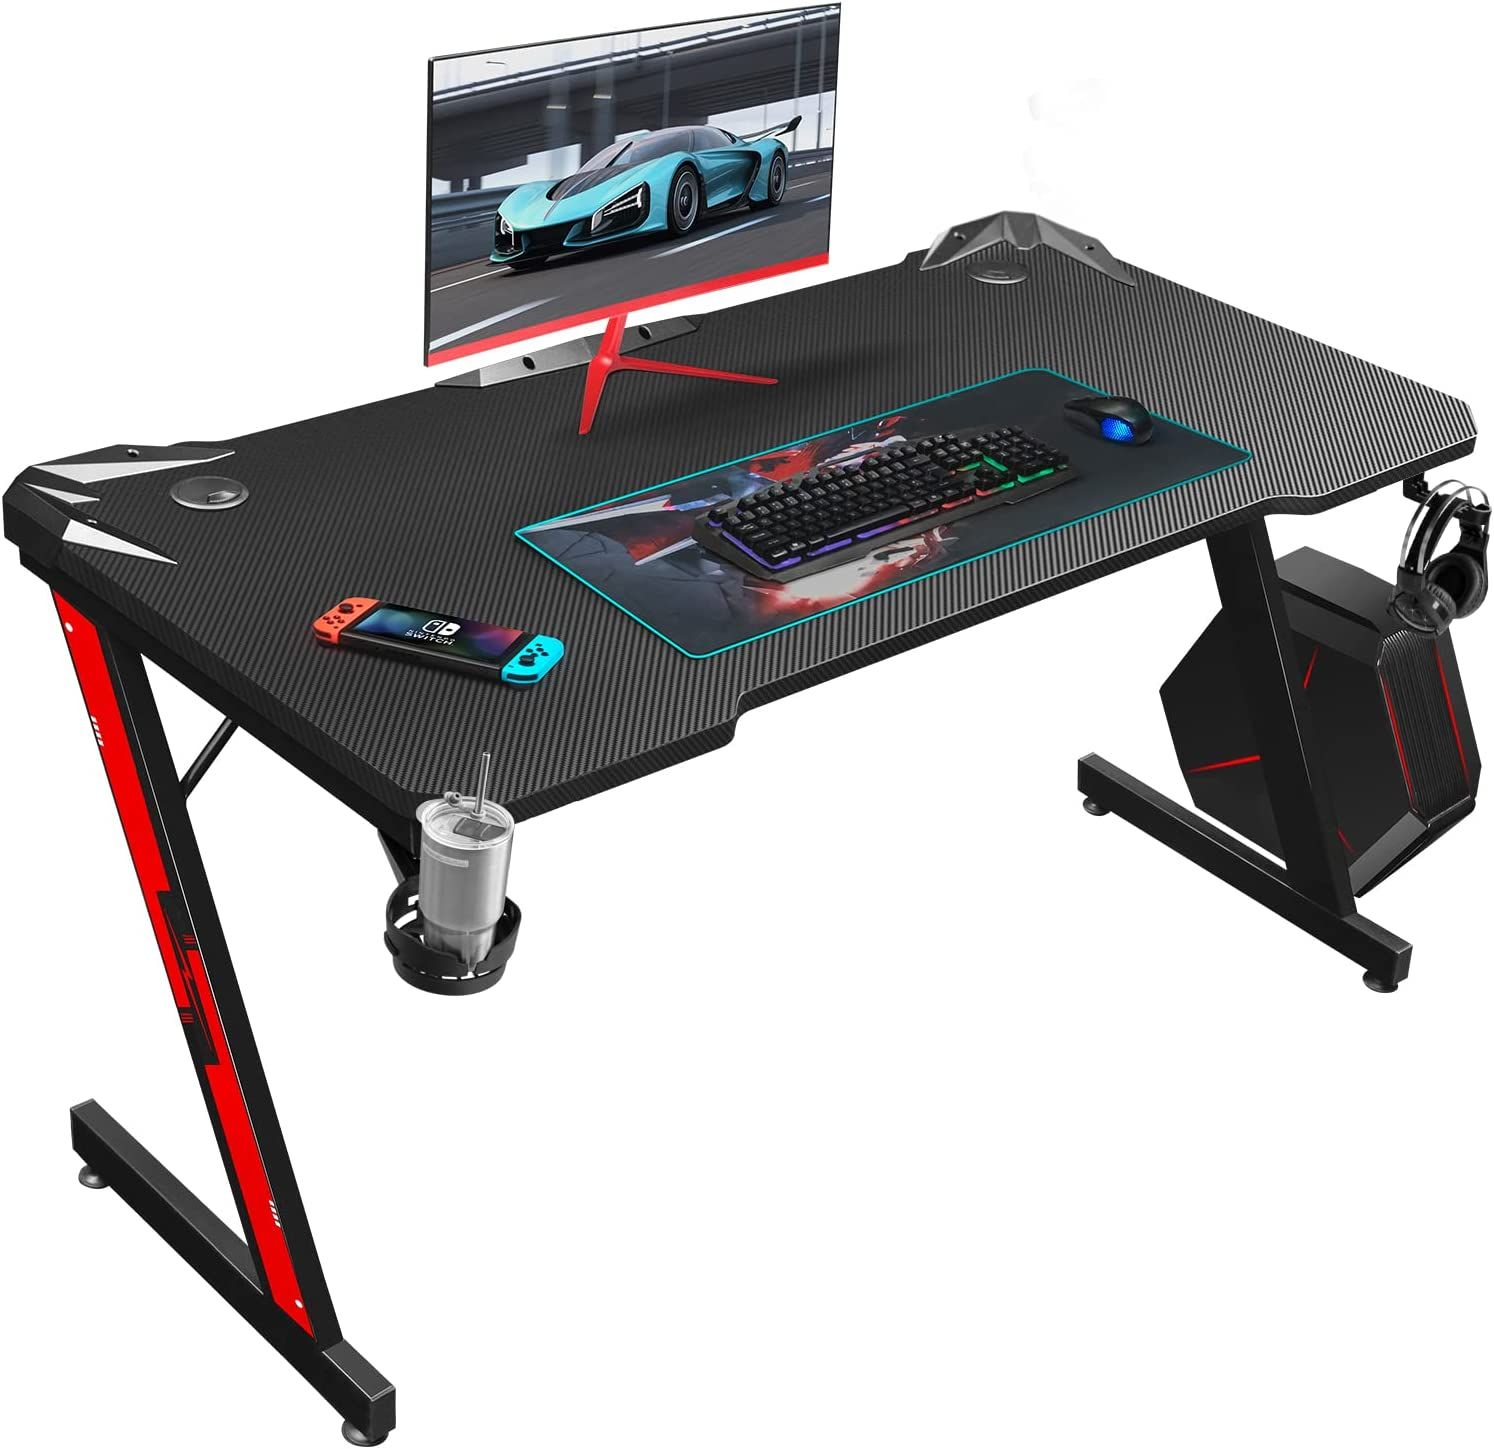 Homall Gaming Desk product image of a dark grey and red gaming desk with a monitor, keyboard, and mouse sat on top.